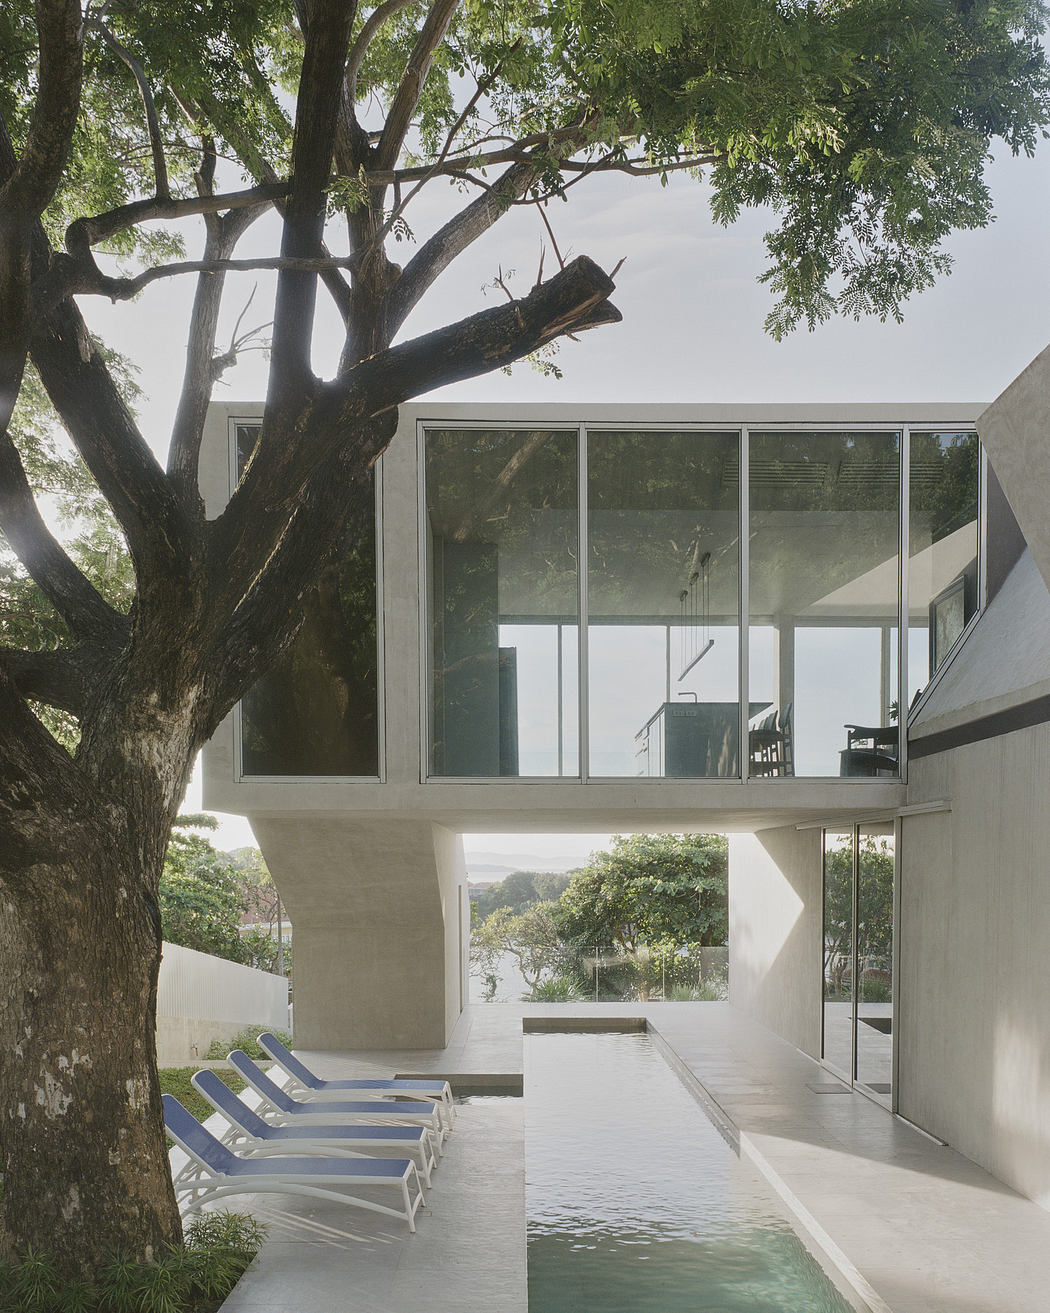 Modern house with large windows overlooking a pool and incorporating a tree.